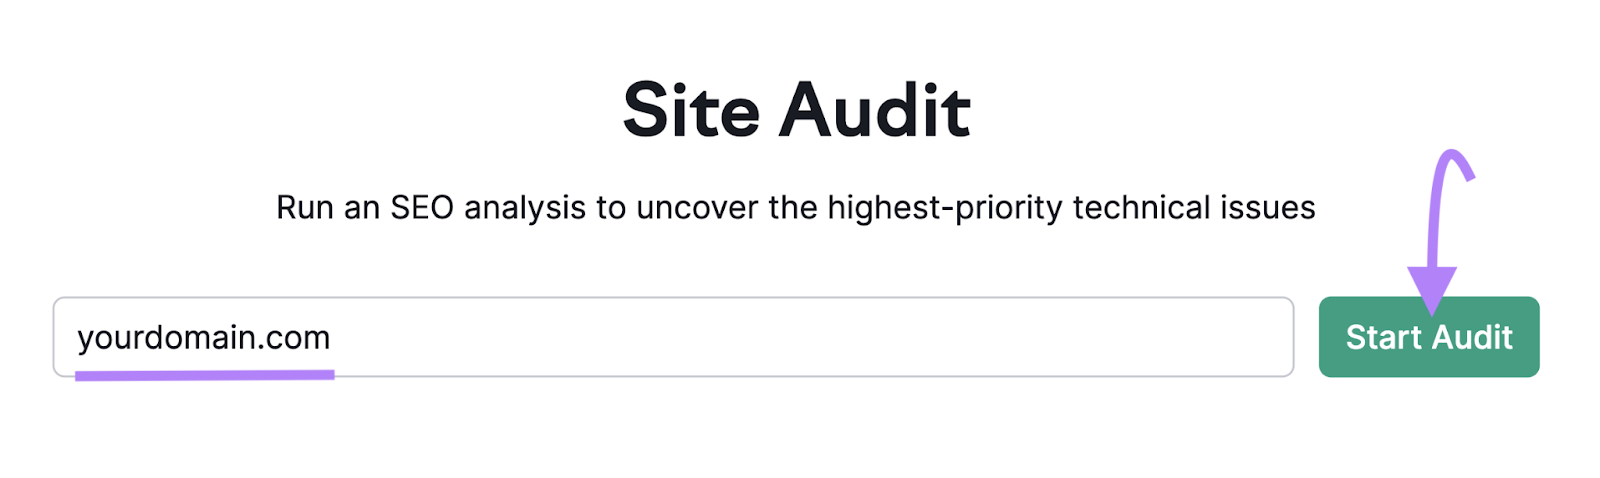 yourdomain.com entered into Site Audit tool